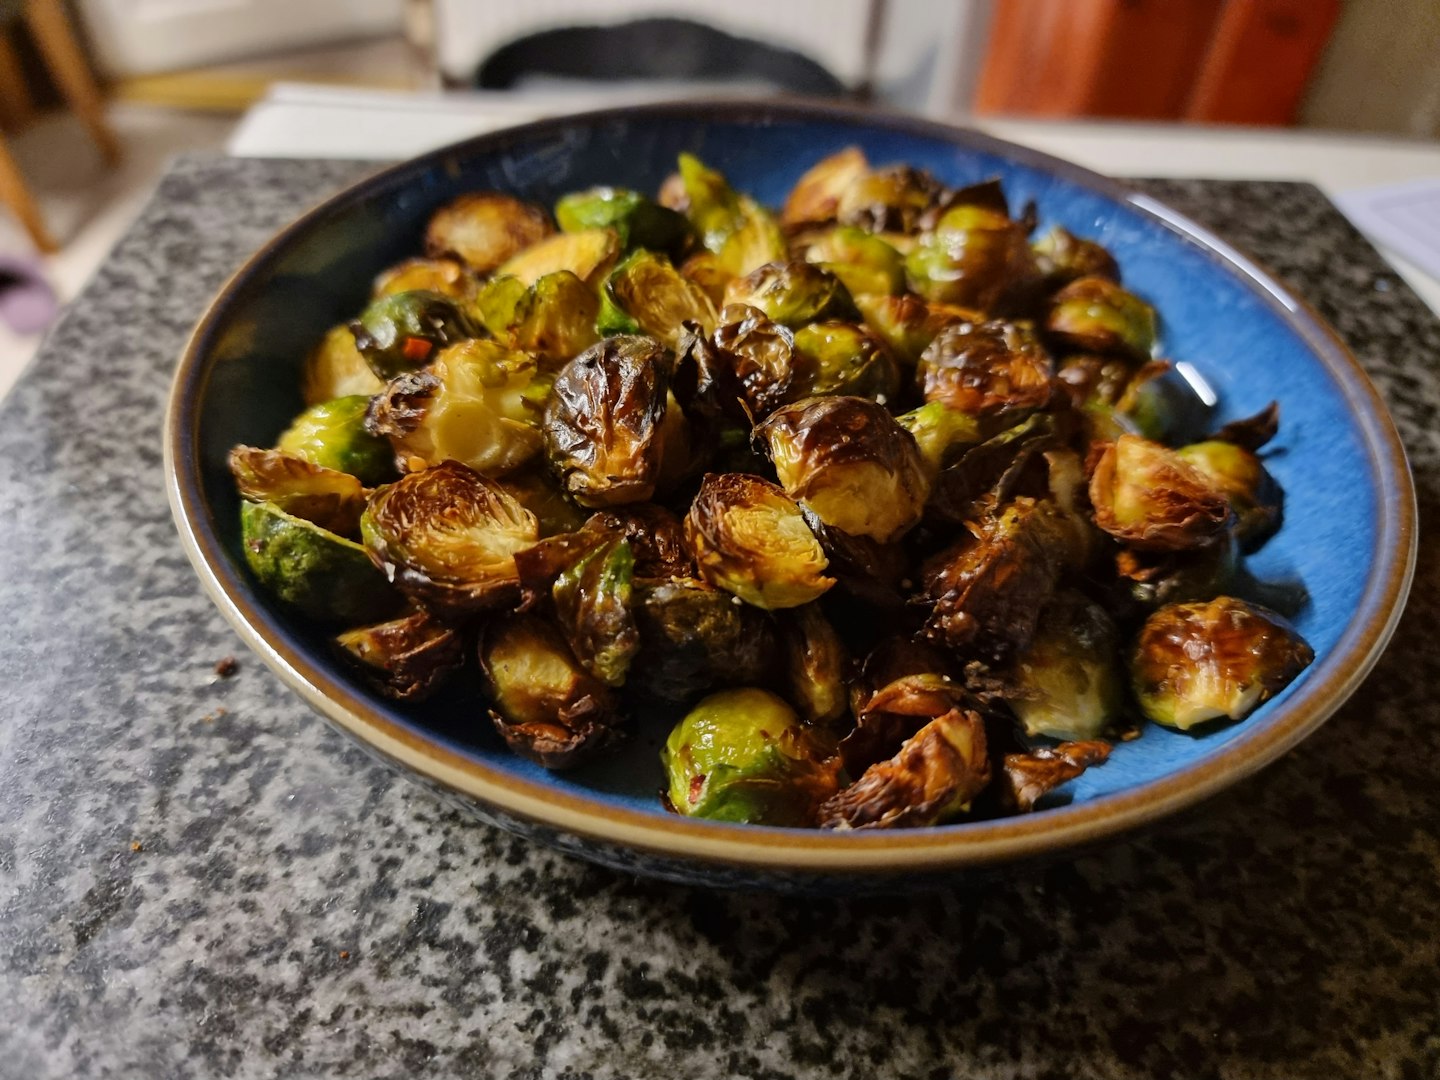 Bowl of Brussels sprouts cooked in air fryer